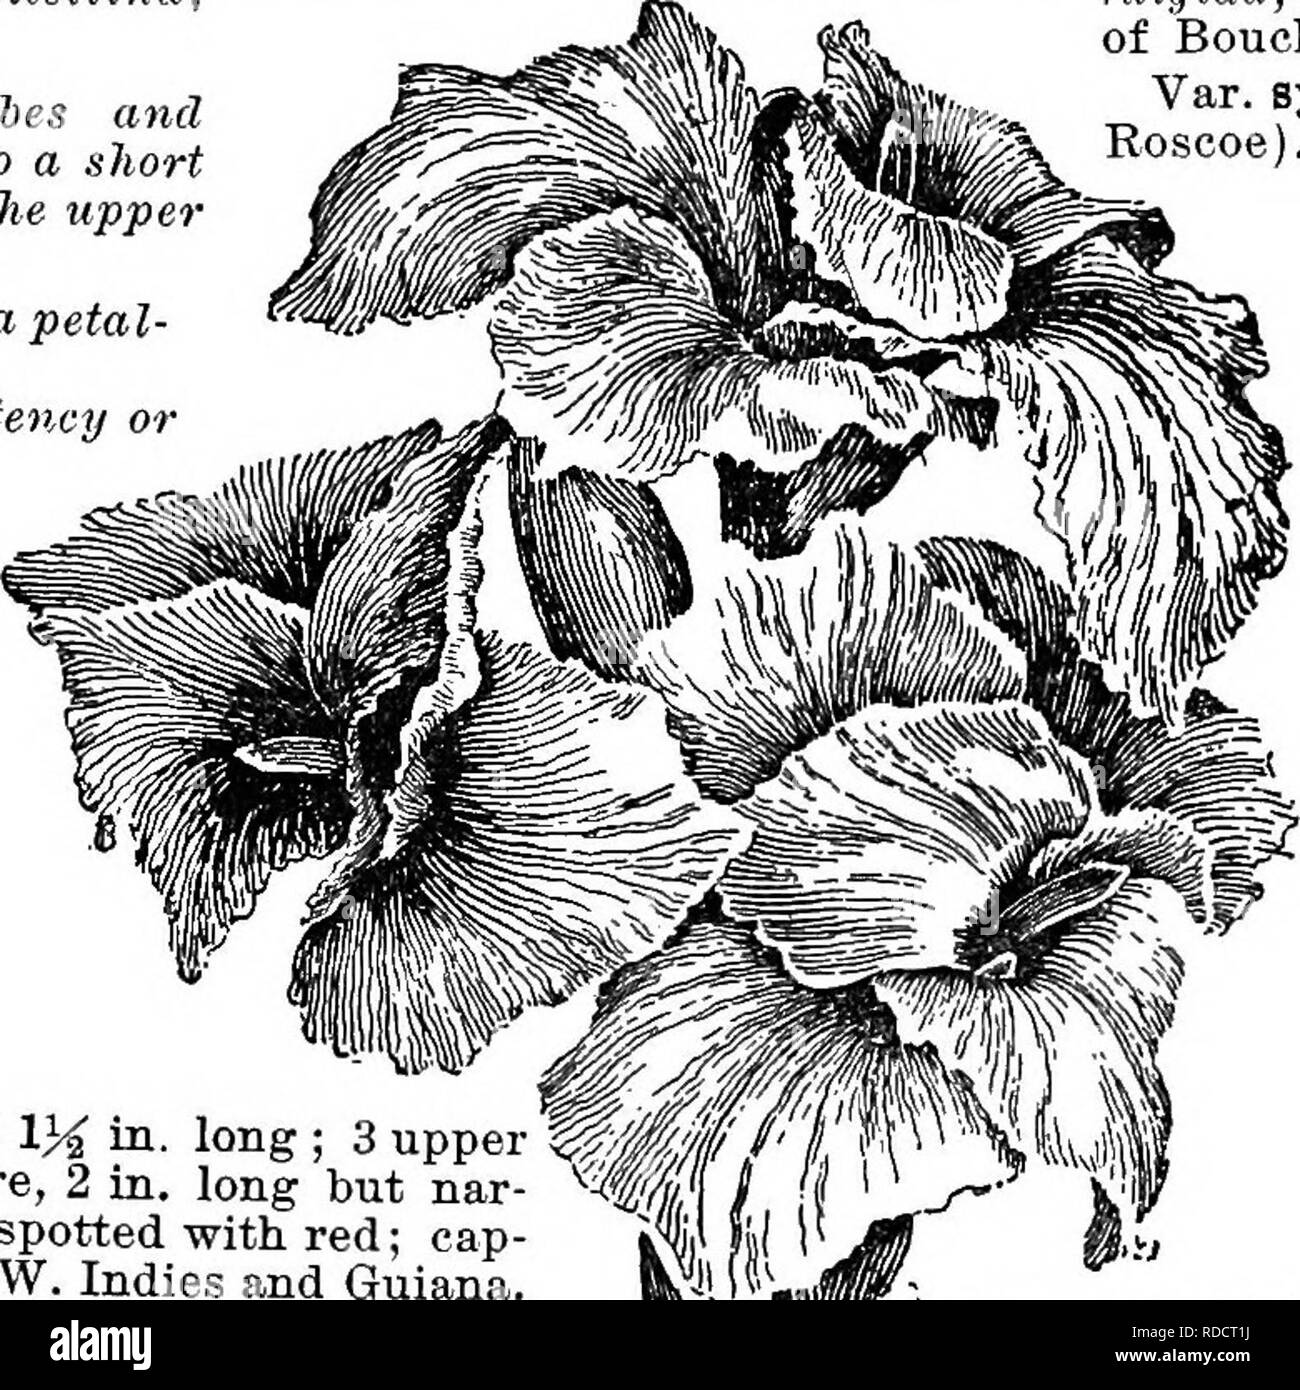 . Cyclopedia of American horticulture, comprising suggestions for cultivation of horticultural plants, descriptions of the species of fruits, vegetables, flowers, and ornamental plants sold in the United States and Canada, together with geographical and biographical sketches. Gardening. CANNA CAOTTA 239 B. C.. tceta, 4 ; Lagunensis, 14 ; Lambertl, 2 ; lanuginosa, 12; latifolia, 7 ; leptocheila, 16 ; leucocarpa, 14 ; liliiflora, 23 ; limbata, 4 ; longifolia, 10 ; lutea, 14 ; macrocarpa, 14 ; macrophylla, 7; maculata-f 14 ; Mexicaiia, 10 ; Moritziana, 14 ; jfepalensis, 16 ; occidental is, 4 ; or Stock Photo